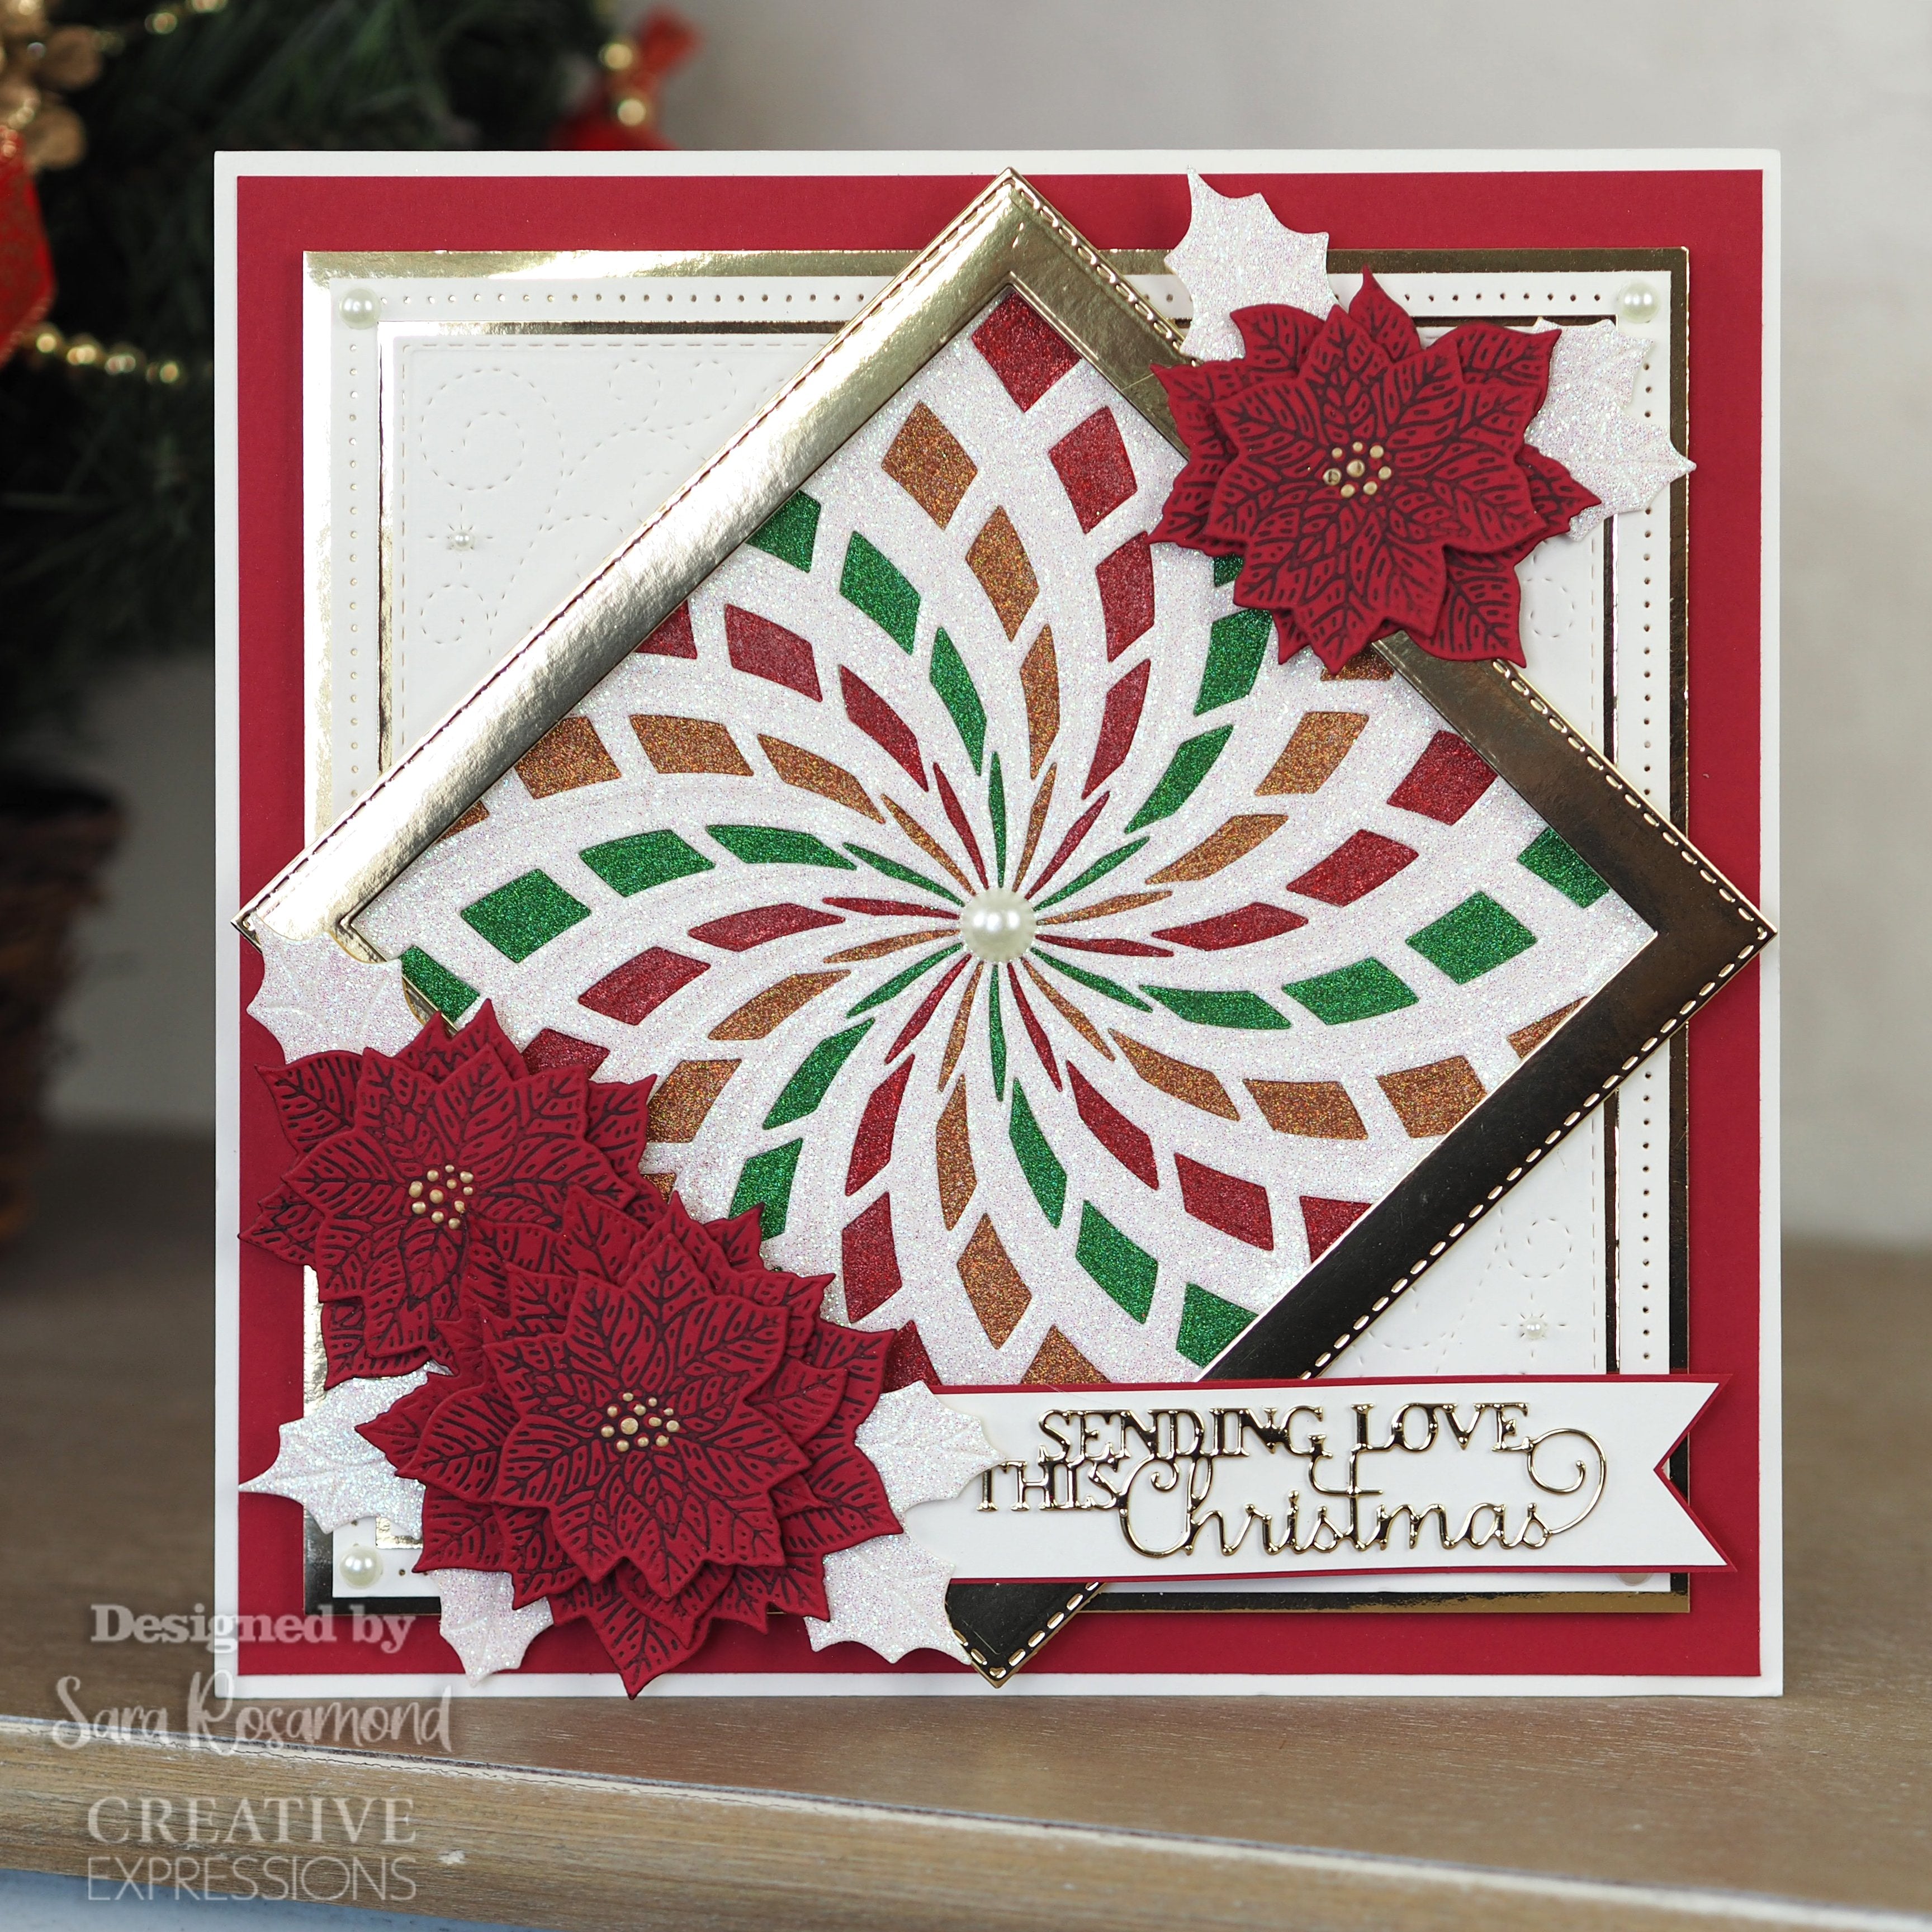 Creative Expressions Sue Wilson Mini Expressions Sending Love This Christmas